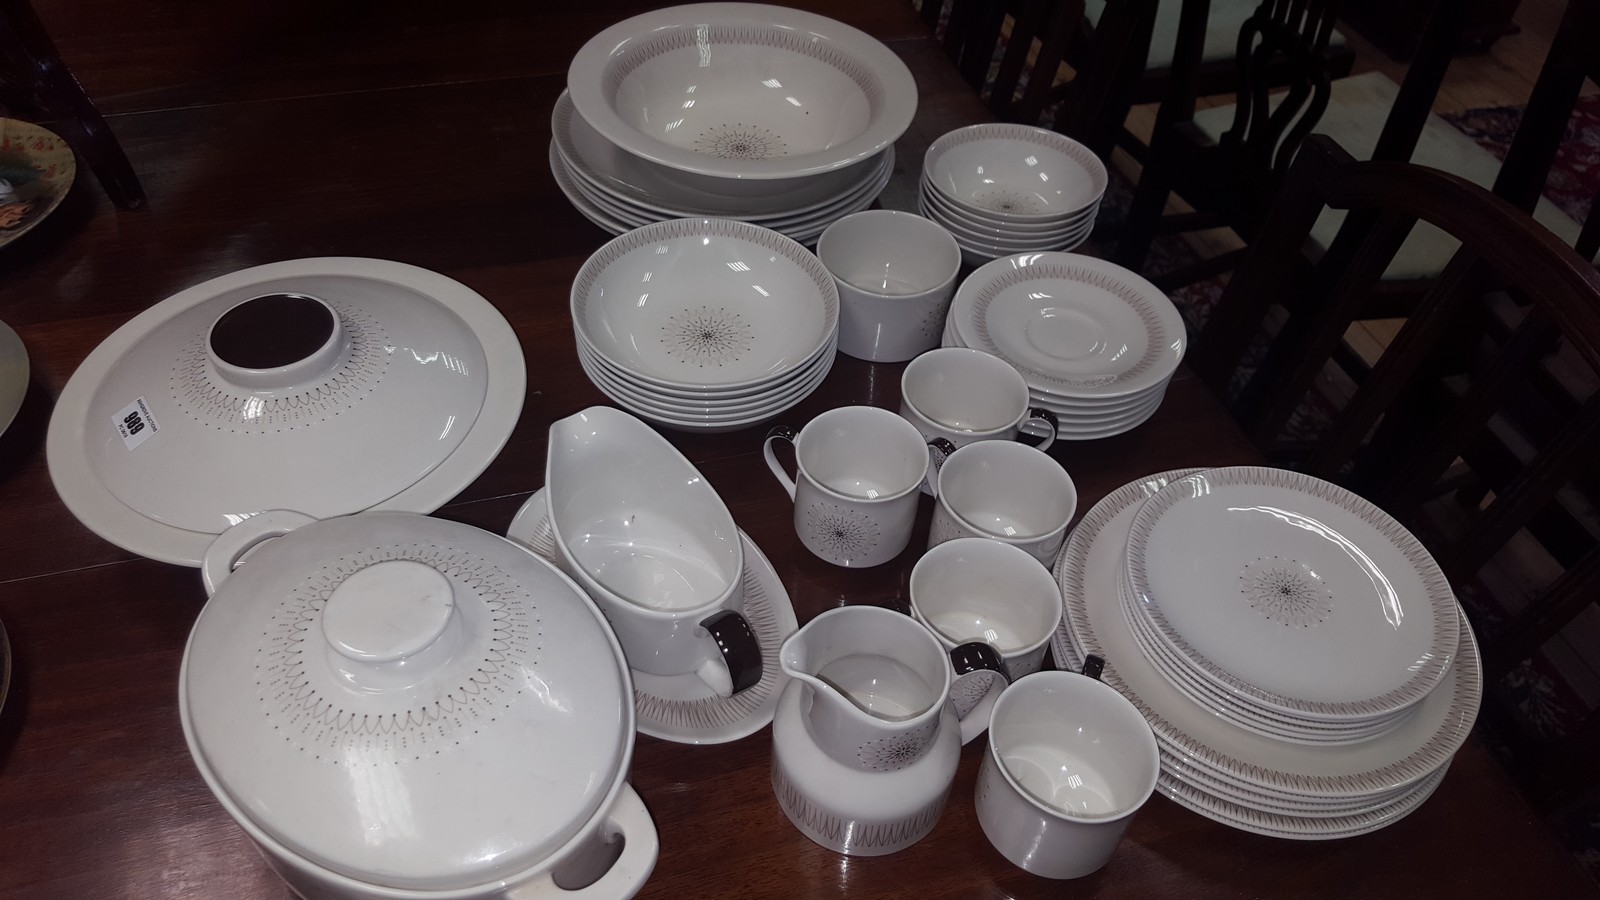 An Extensive Royal Doulton 'Morning Star' Dinner and Tea Service for Six.